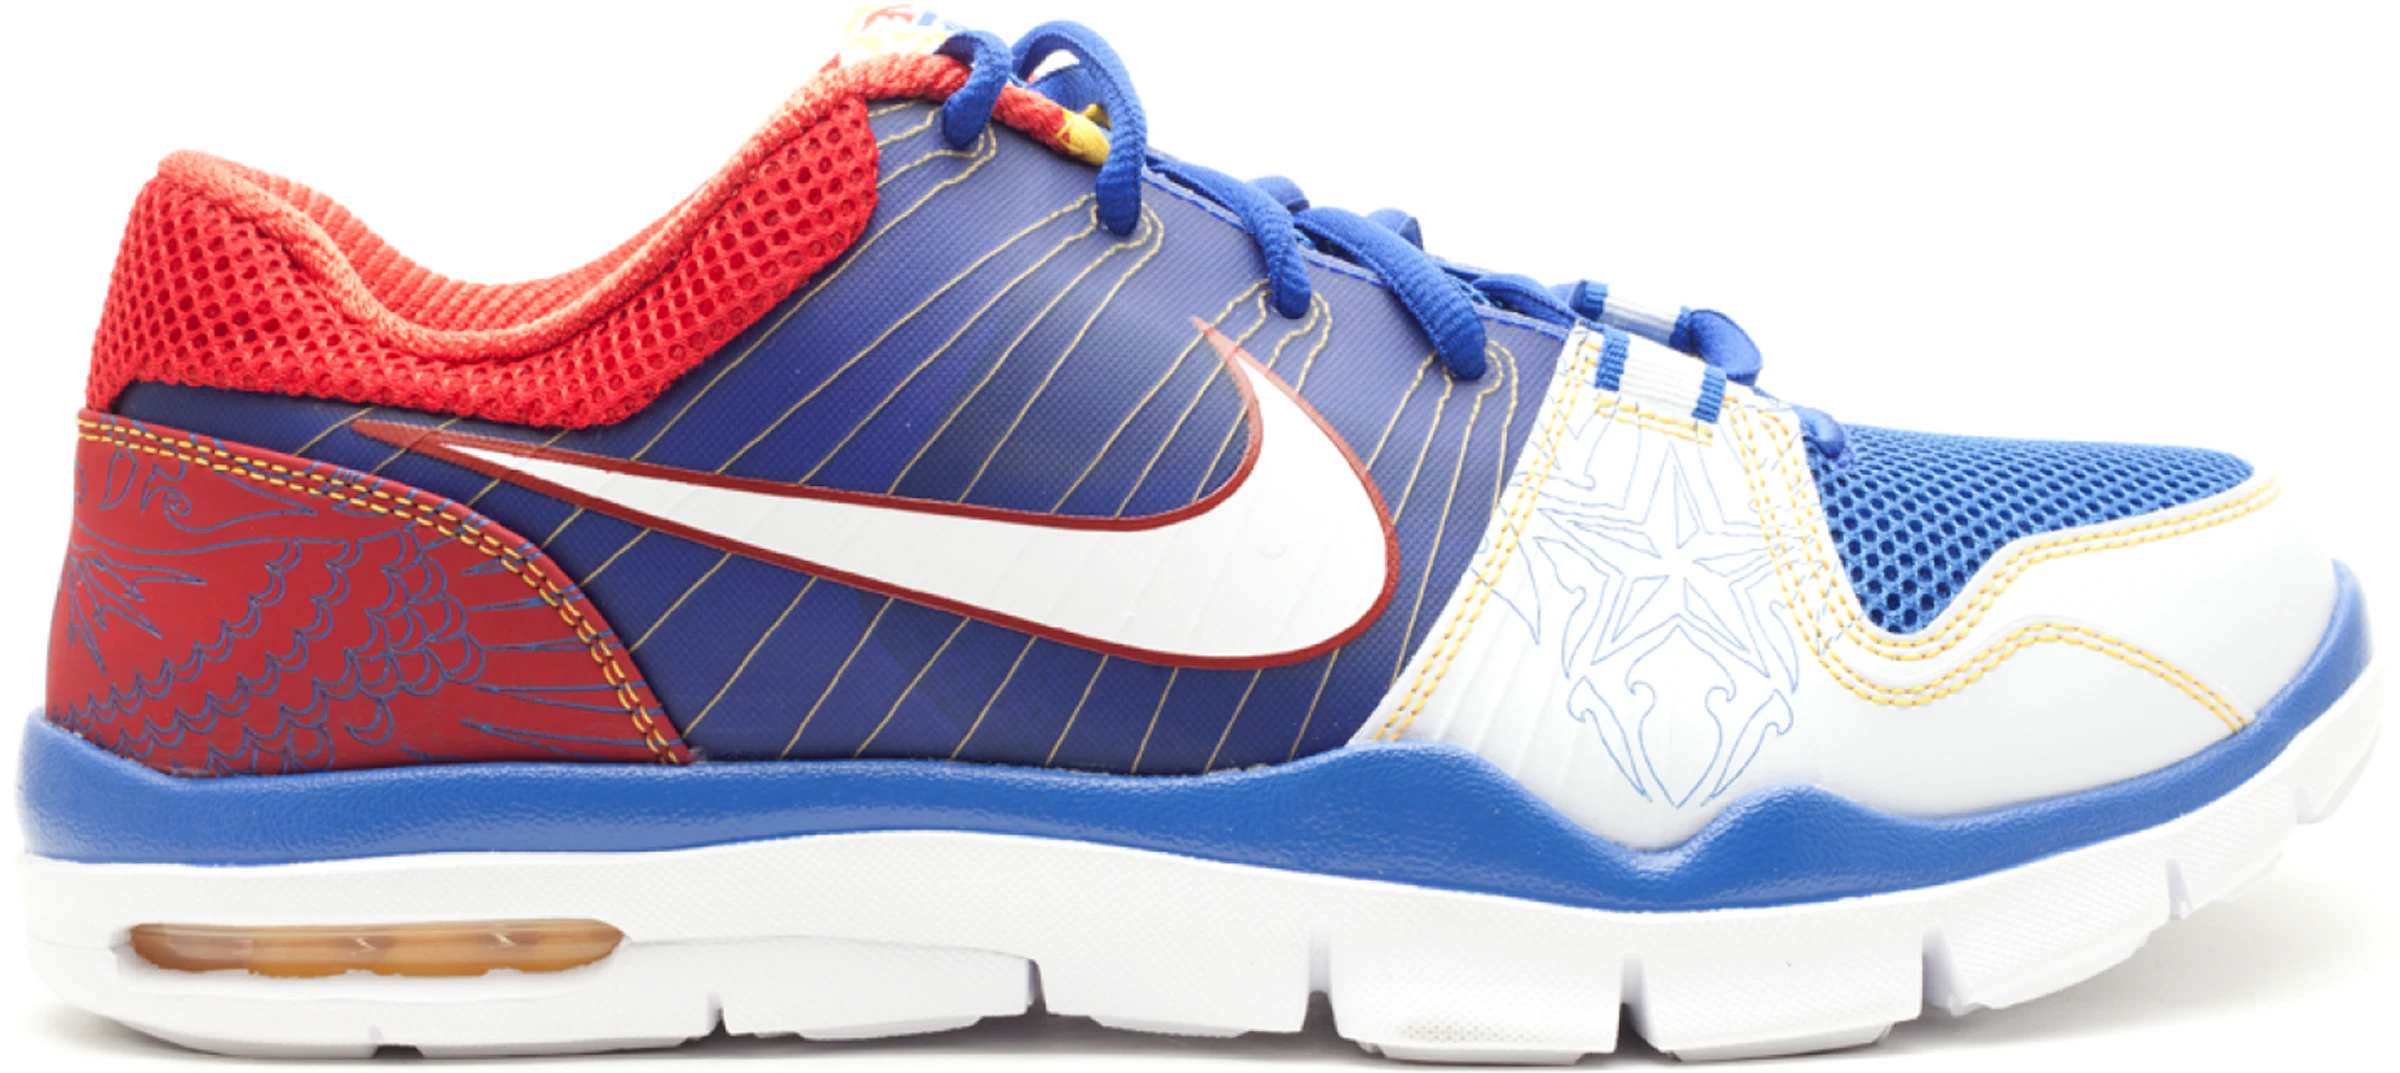 Nike 1 Low Manny Pacquiao - -